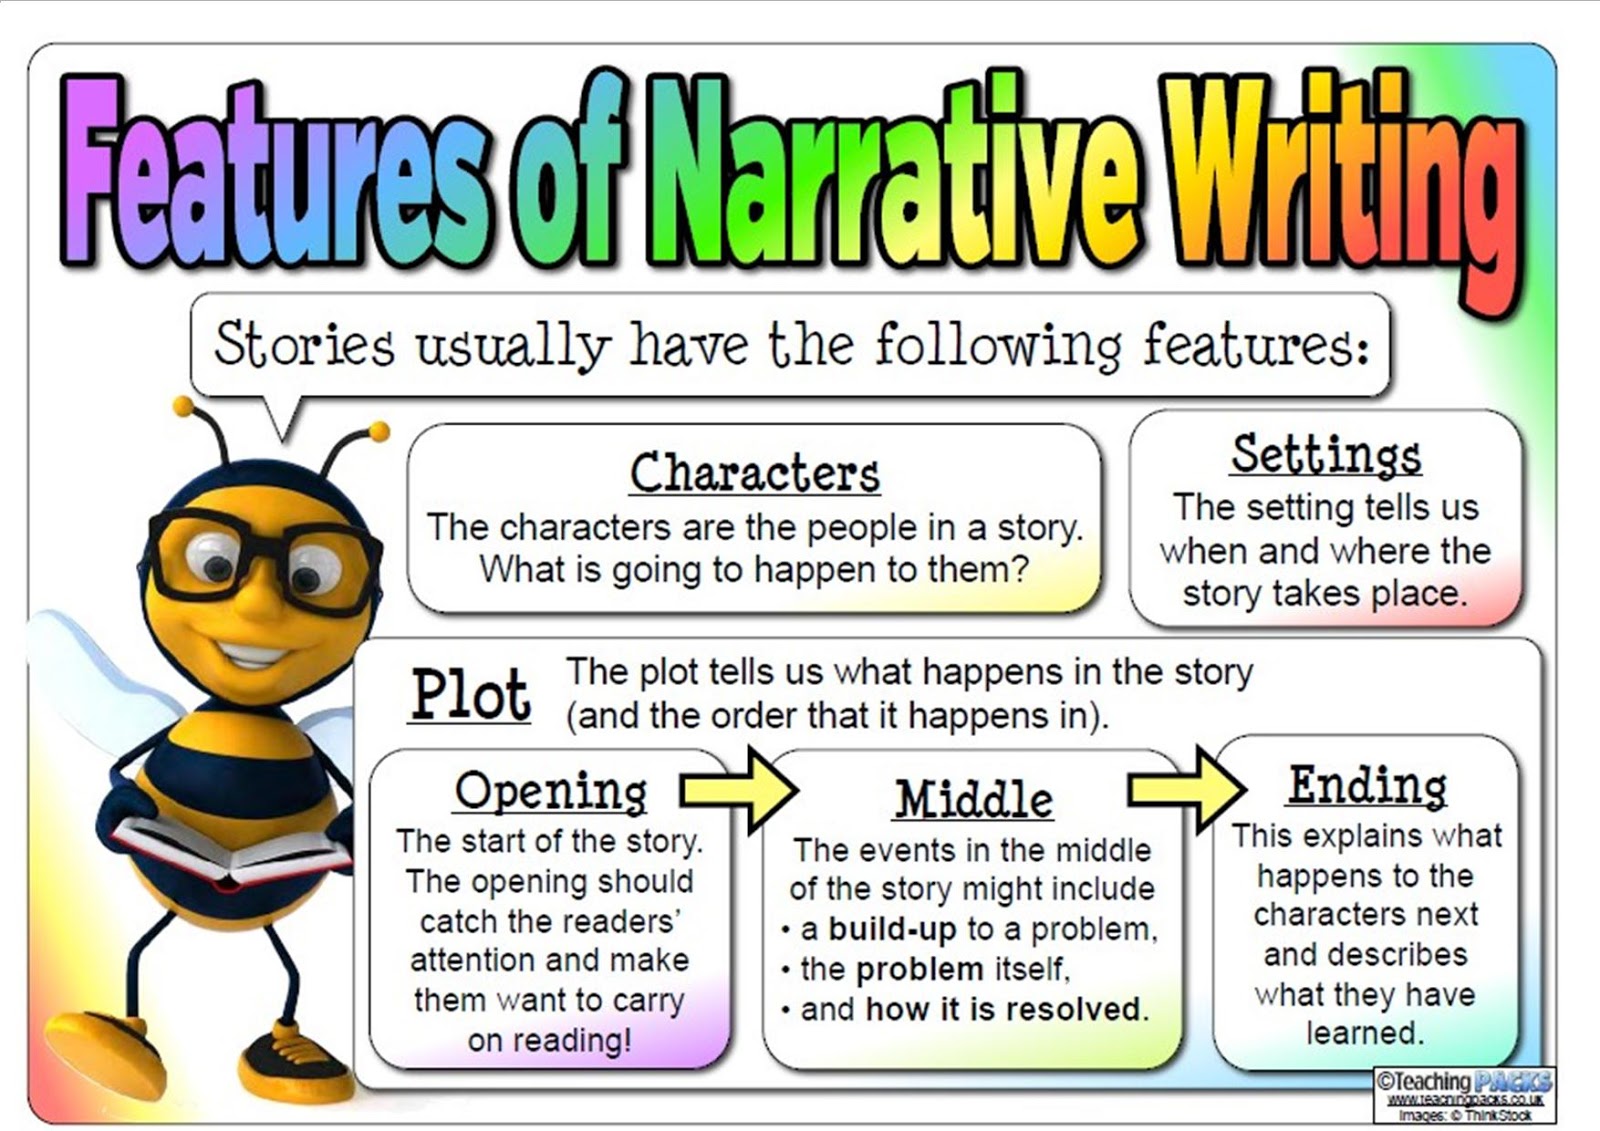 Characteristic feature. Character and Plot. Character stories. Features of character. Writing stories.